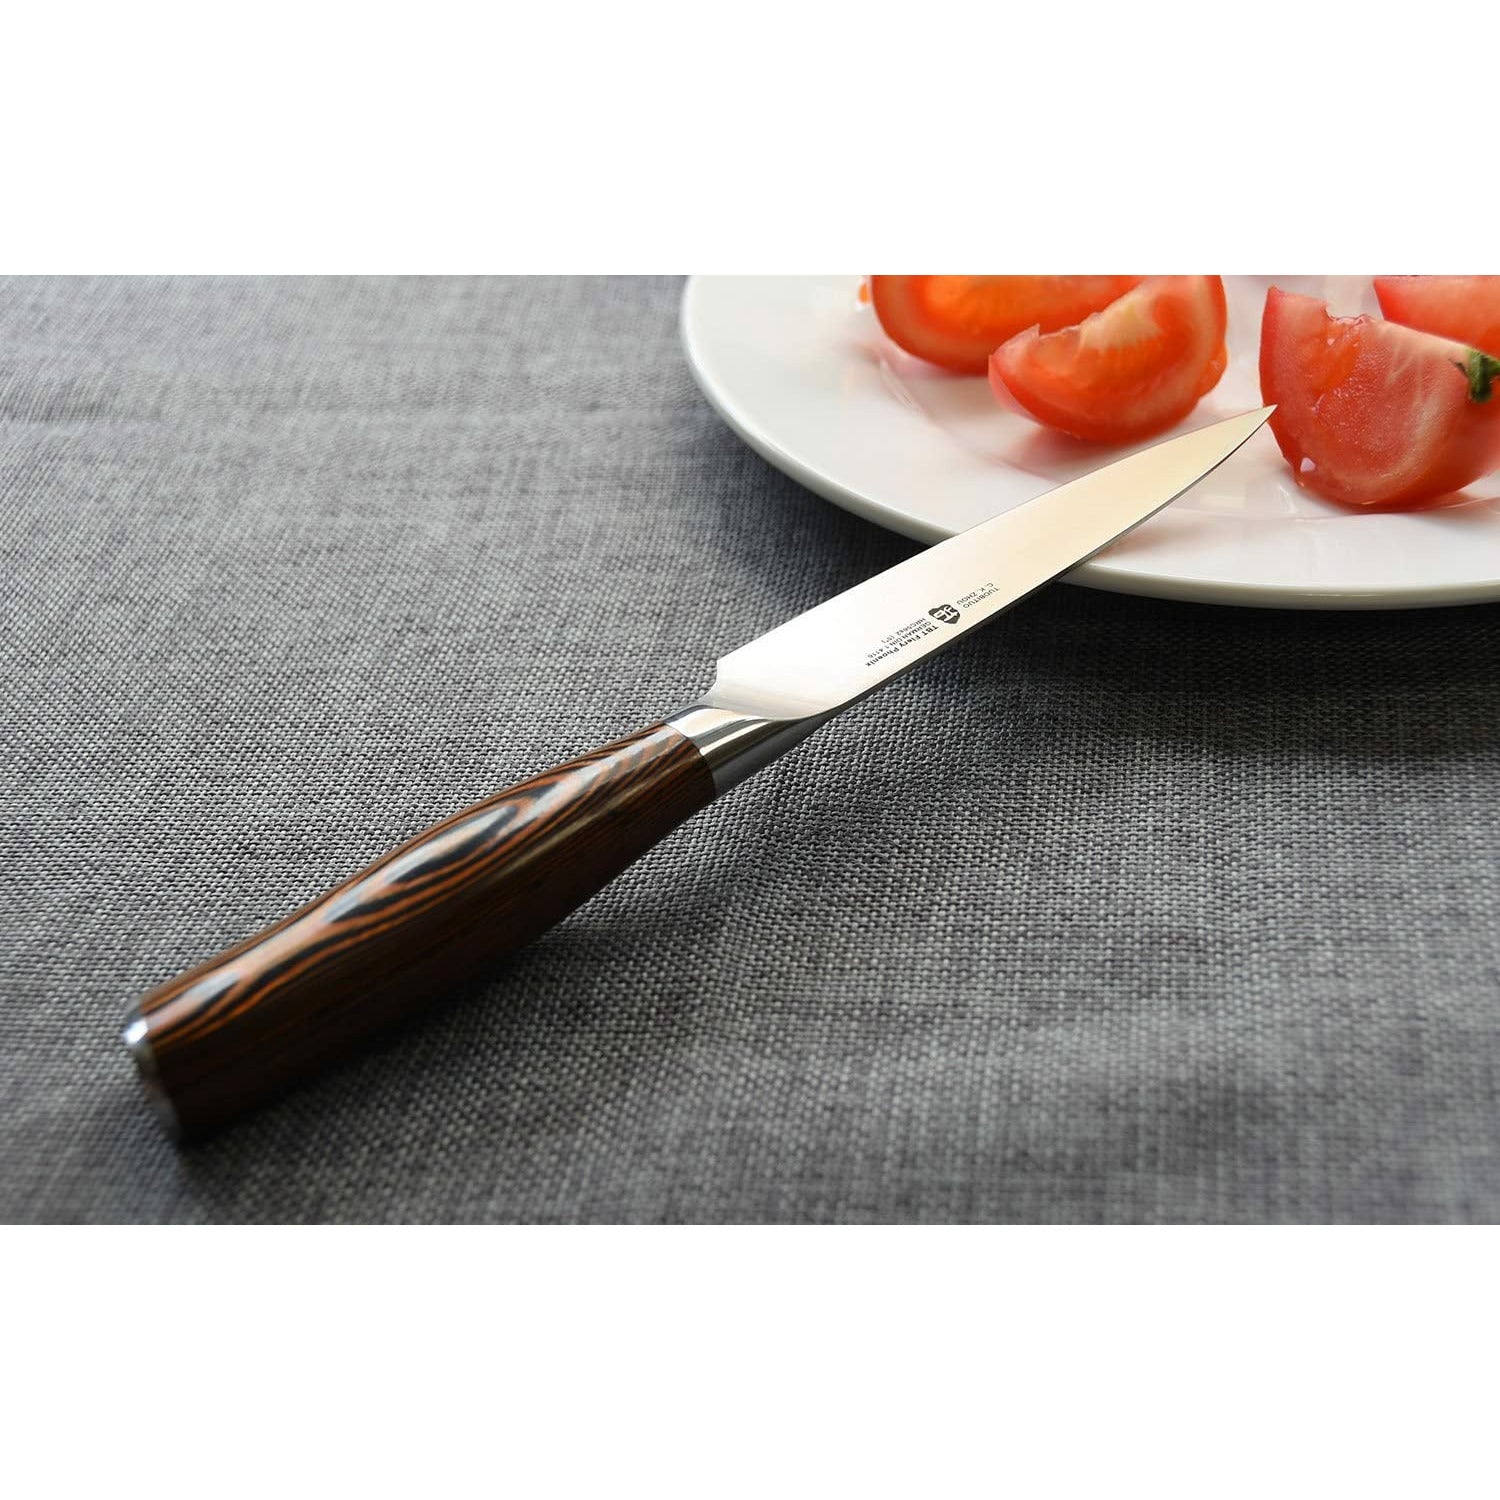 TUO Cutlery - TC1501 - 4 inch Fruit Peeling Paring Knife– Wholesale Home